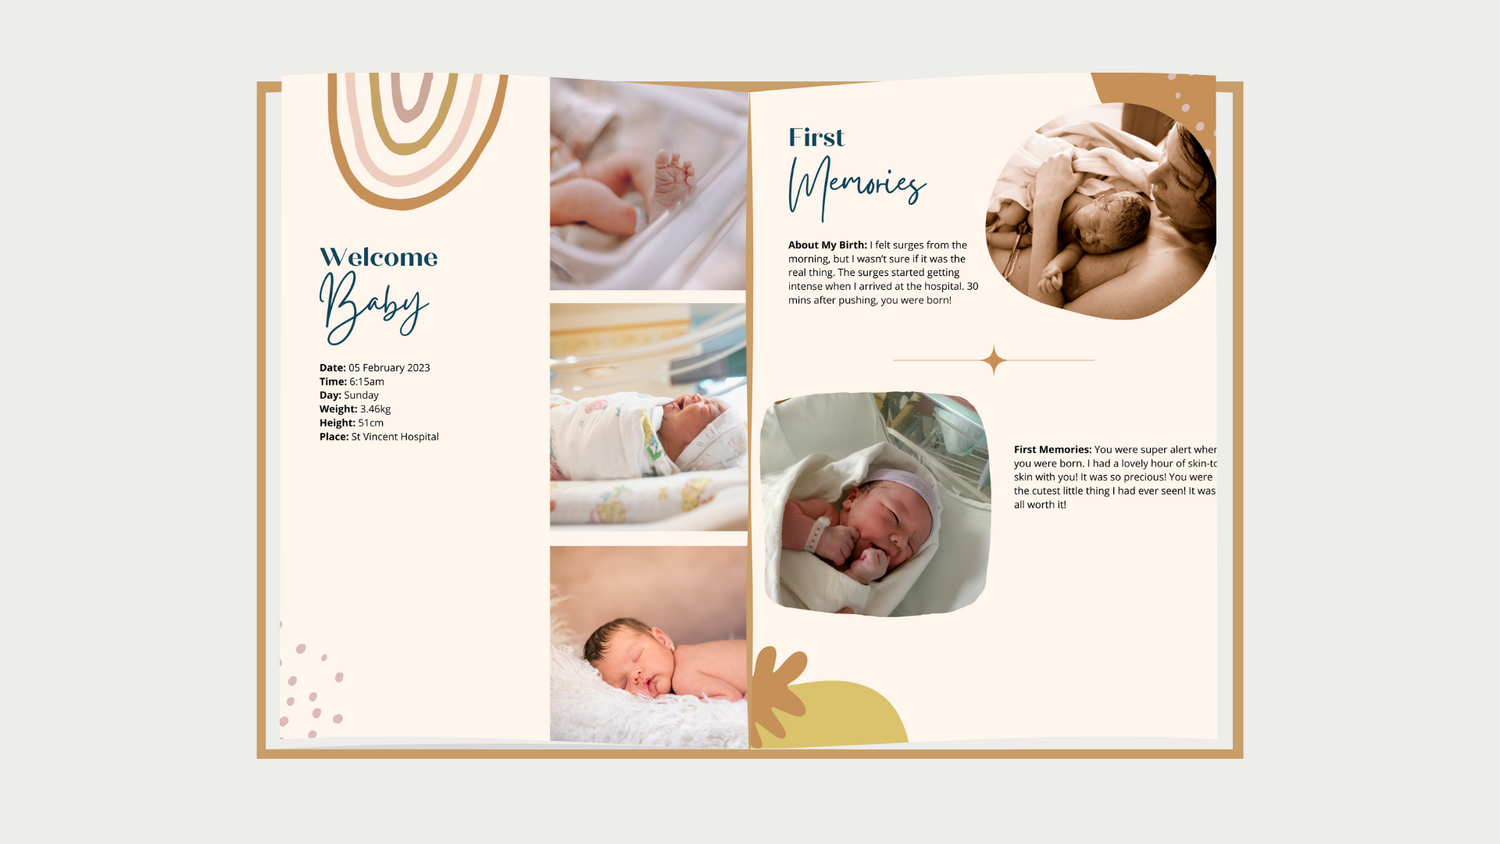 welcome baby and first memories pages of Dujourbaby pregnancy and baby memory book